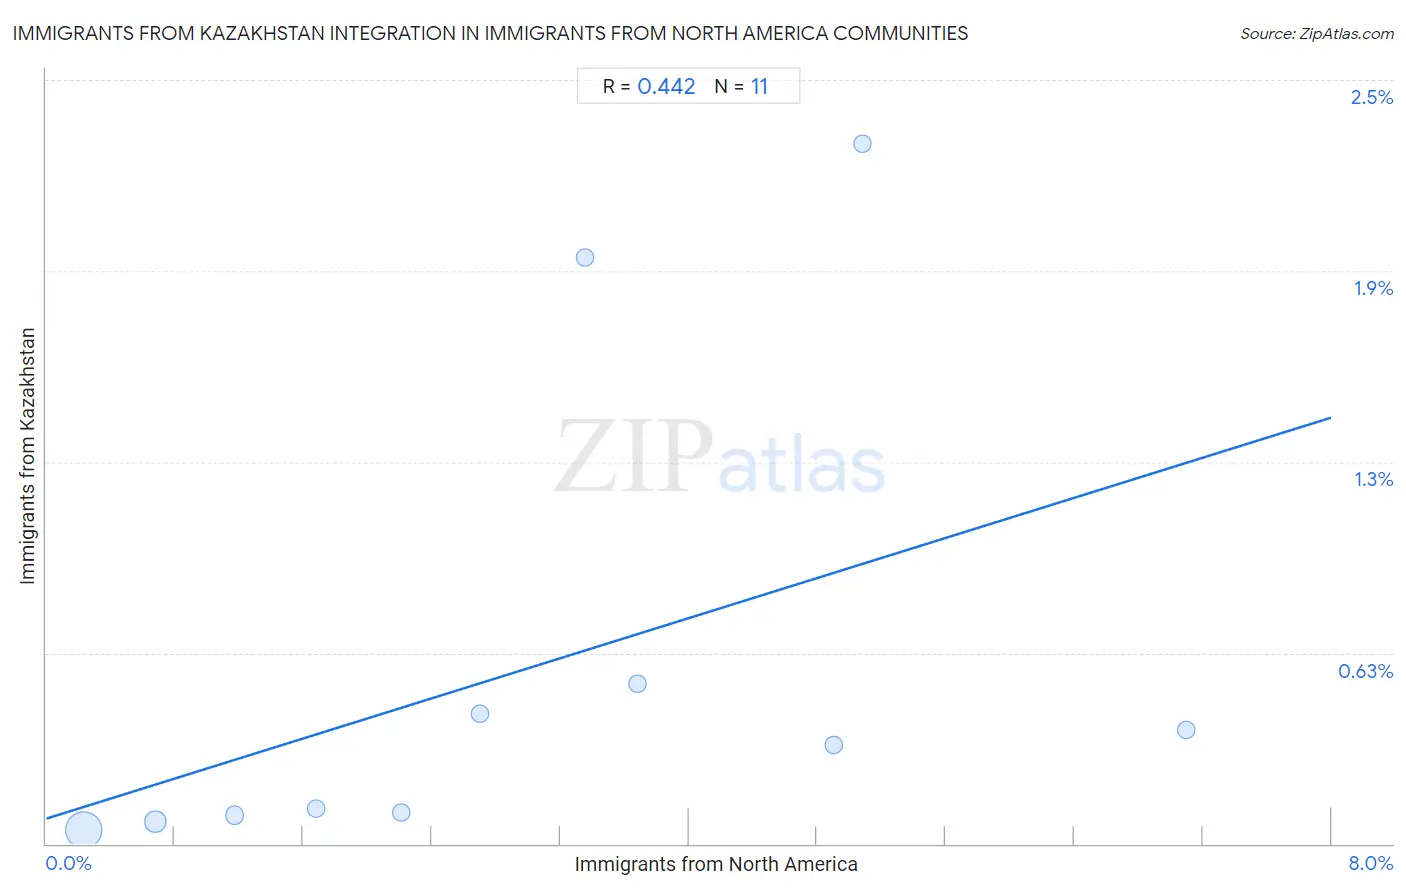 Immigrants from North America Integration in Immigrants from Kazakhstan Communities